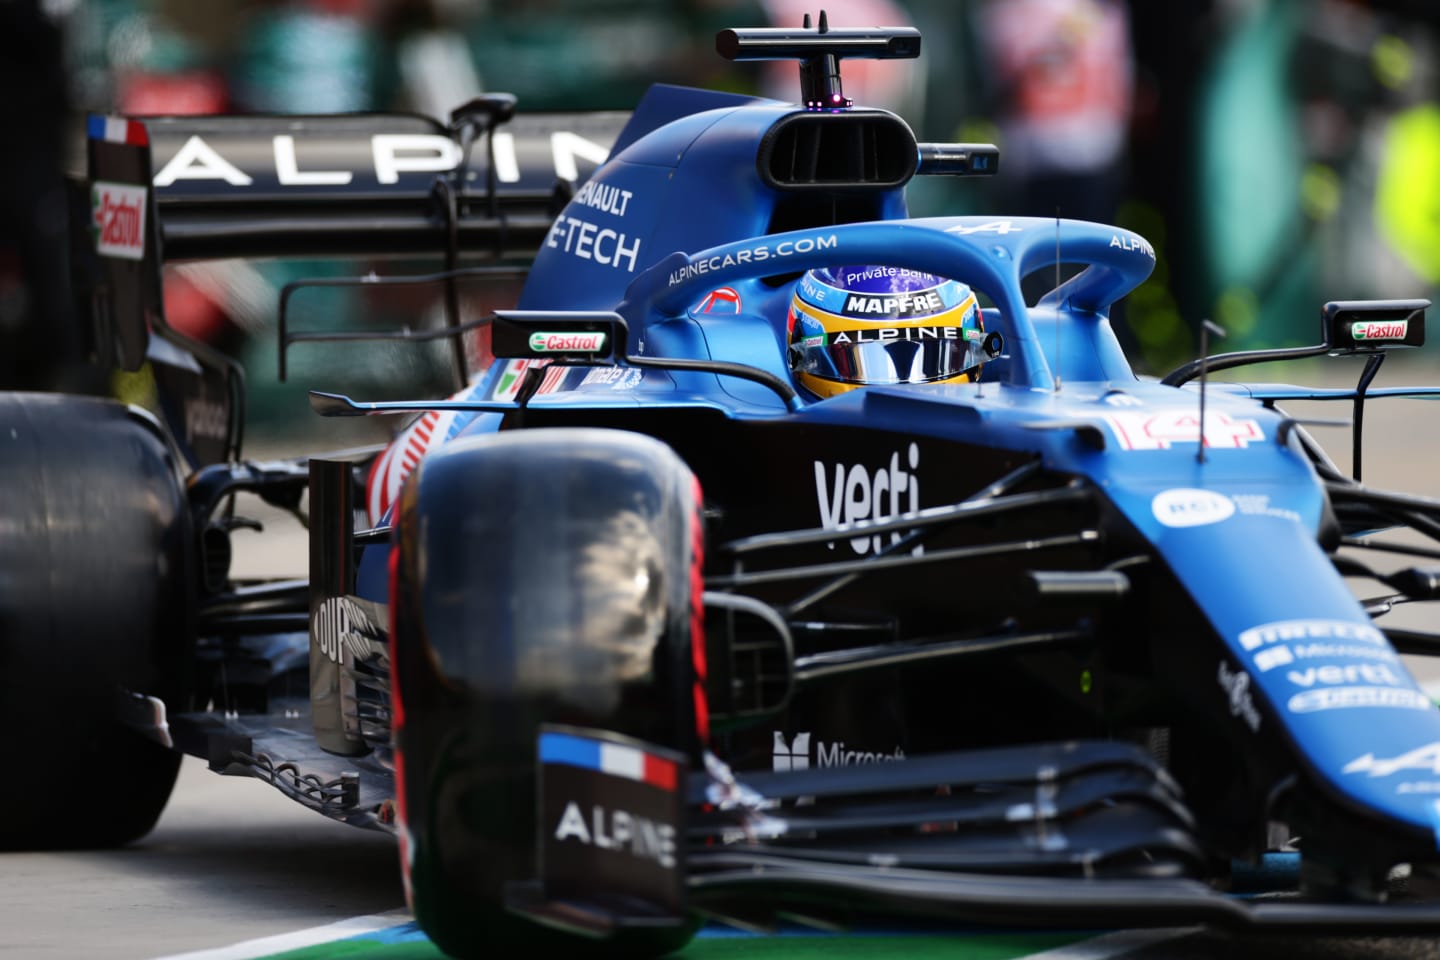 IMOLA, ITALY - APRIL 16: Fernando Alonso of Spain driving the (14) Alpine A521 Renault in the Pitlane during practice ahead of the F1 Grand Prix of Emilia Romagna at Autodromo Enzo e Dino Ferrari on April 16, 2021 in Imola, Italy. (Photo by Peter Fox/Getty Images)